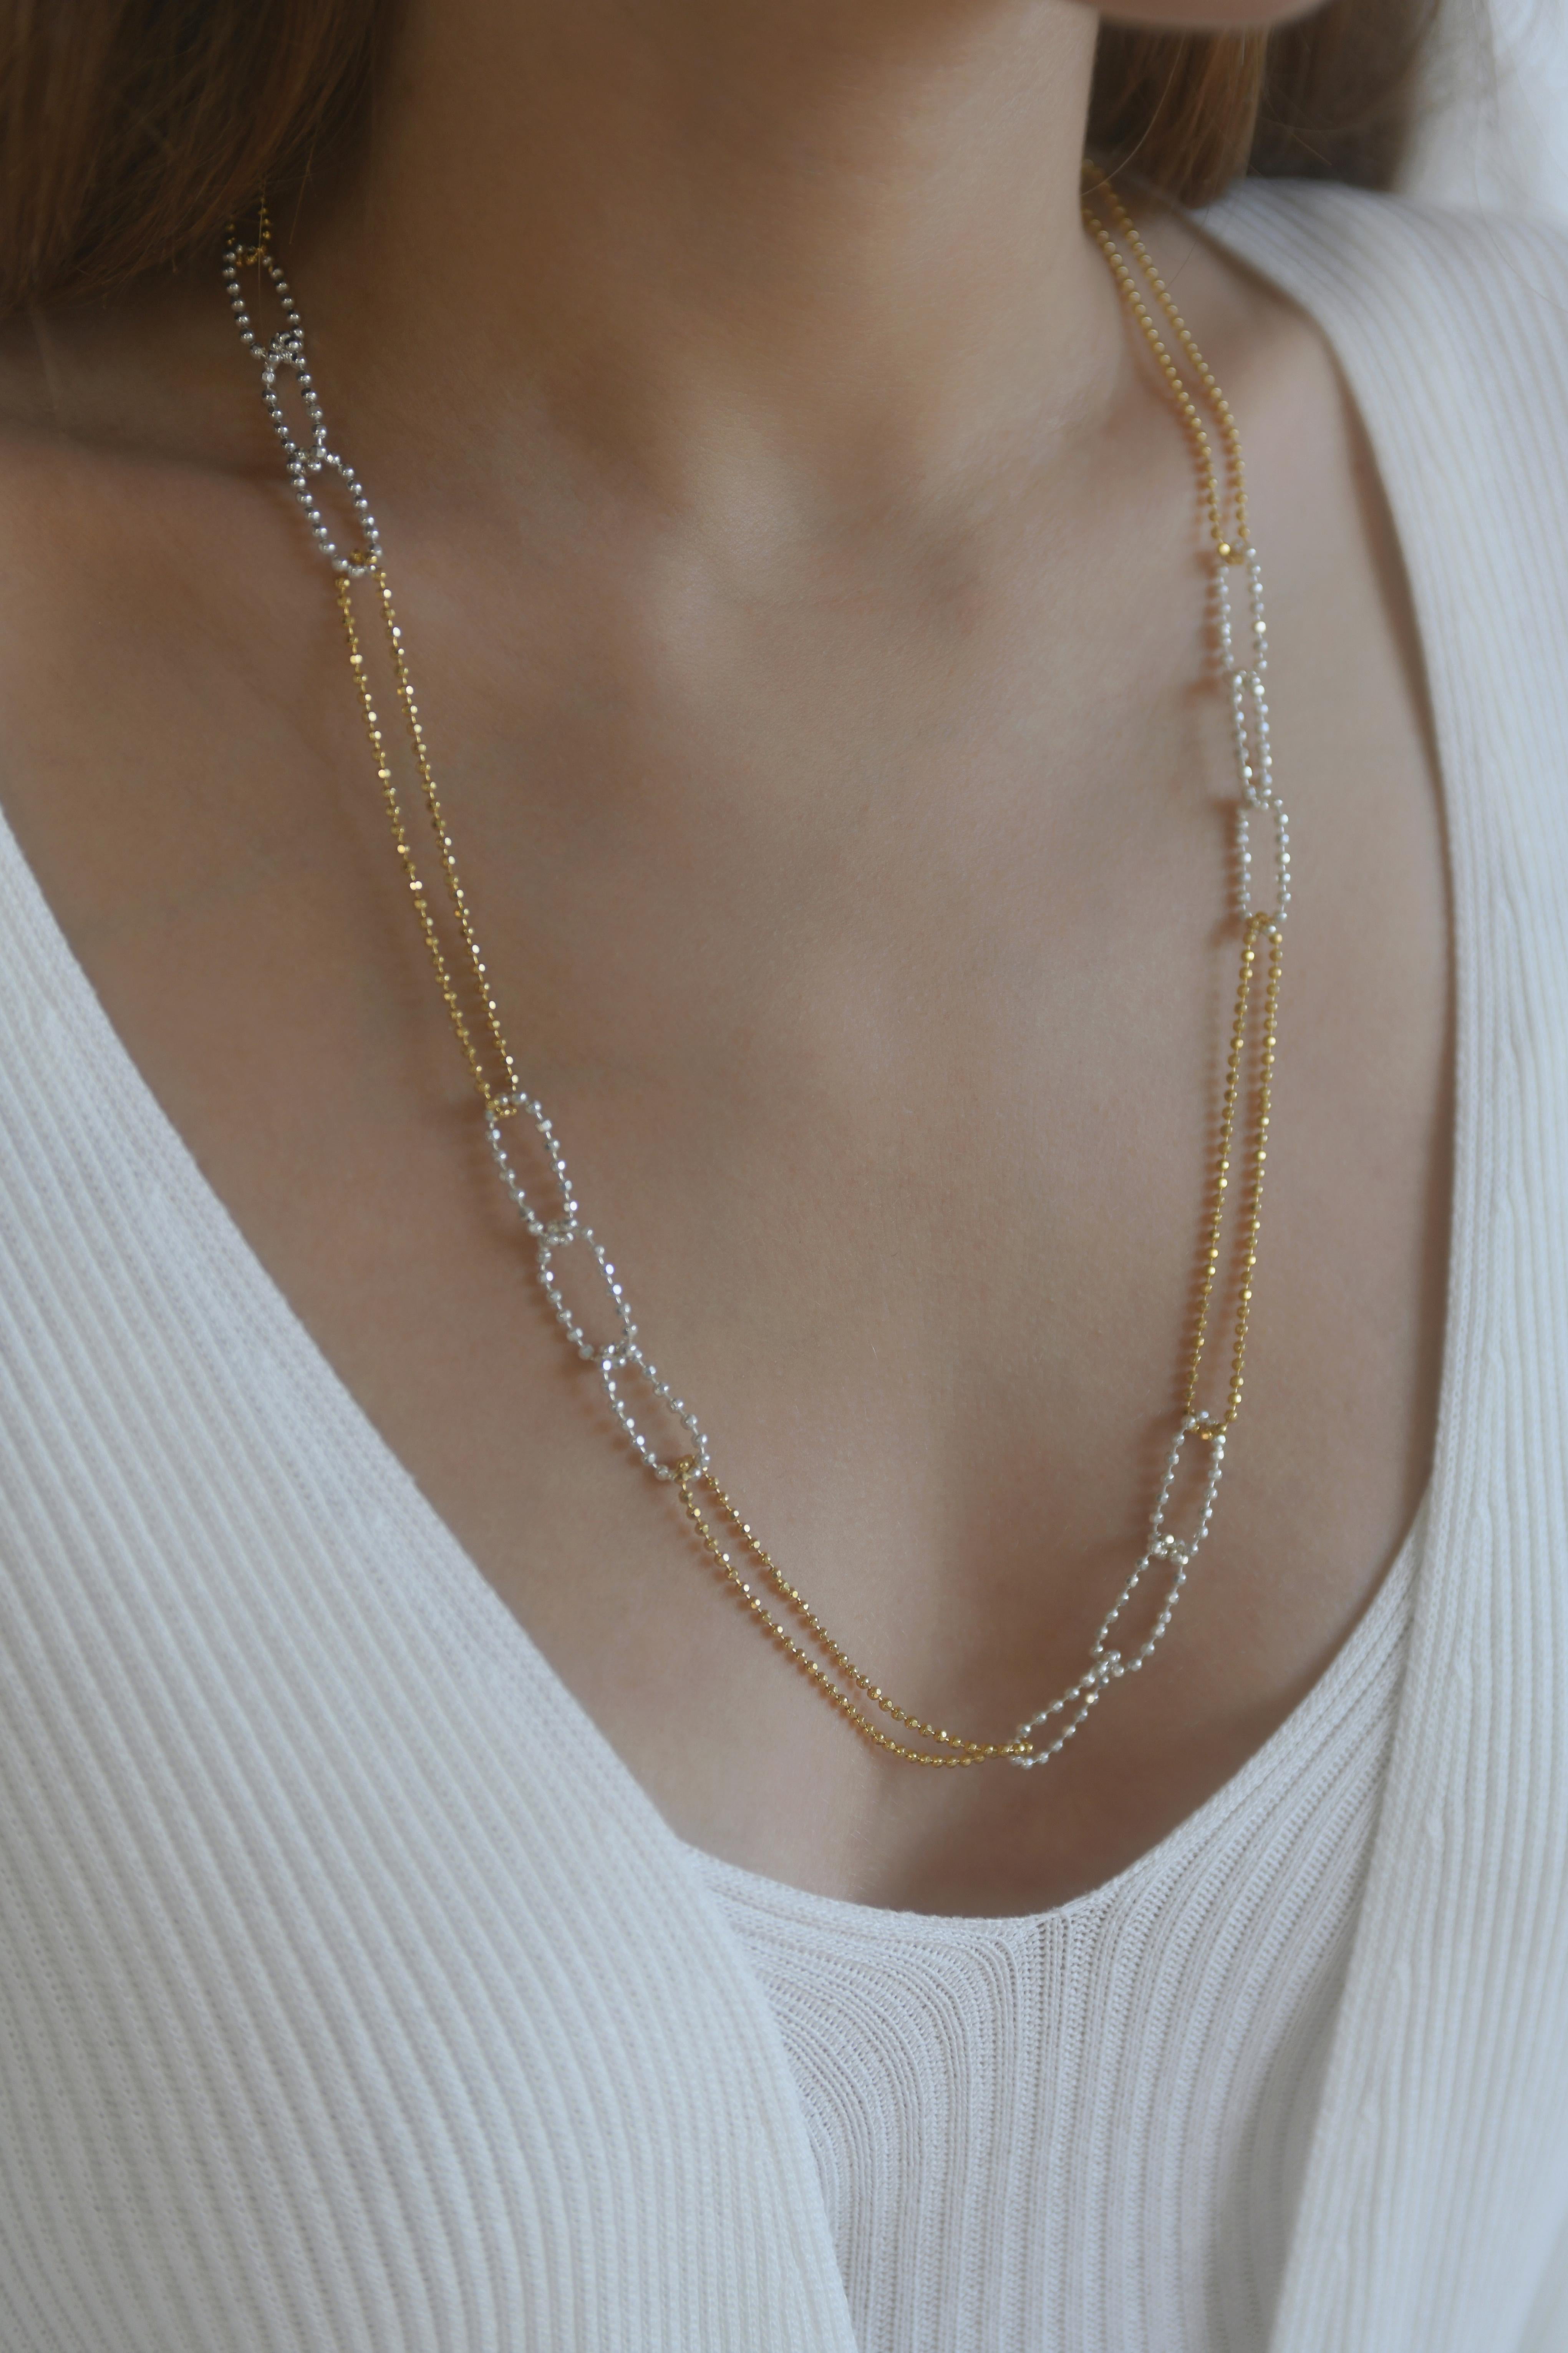 gold and silver mixed necklace